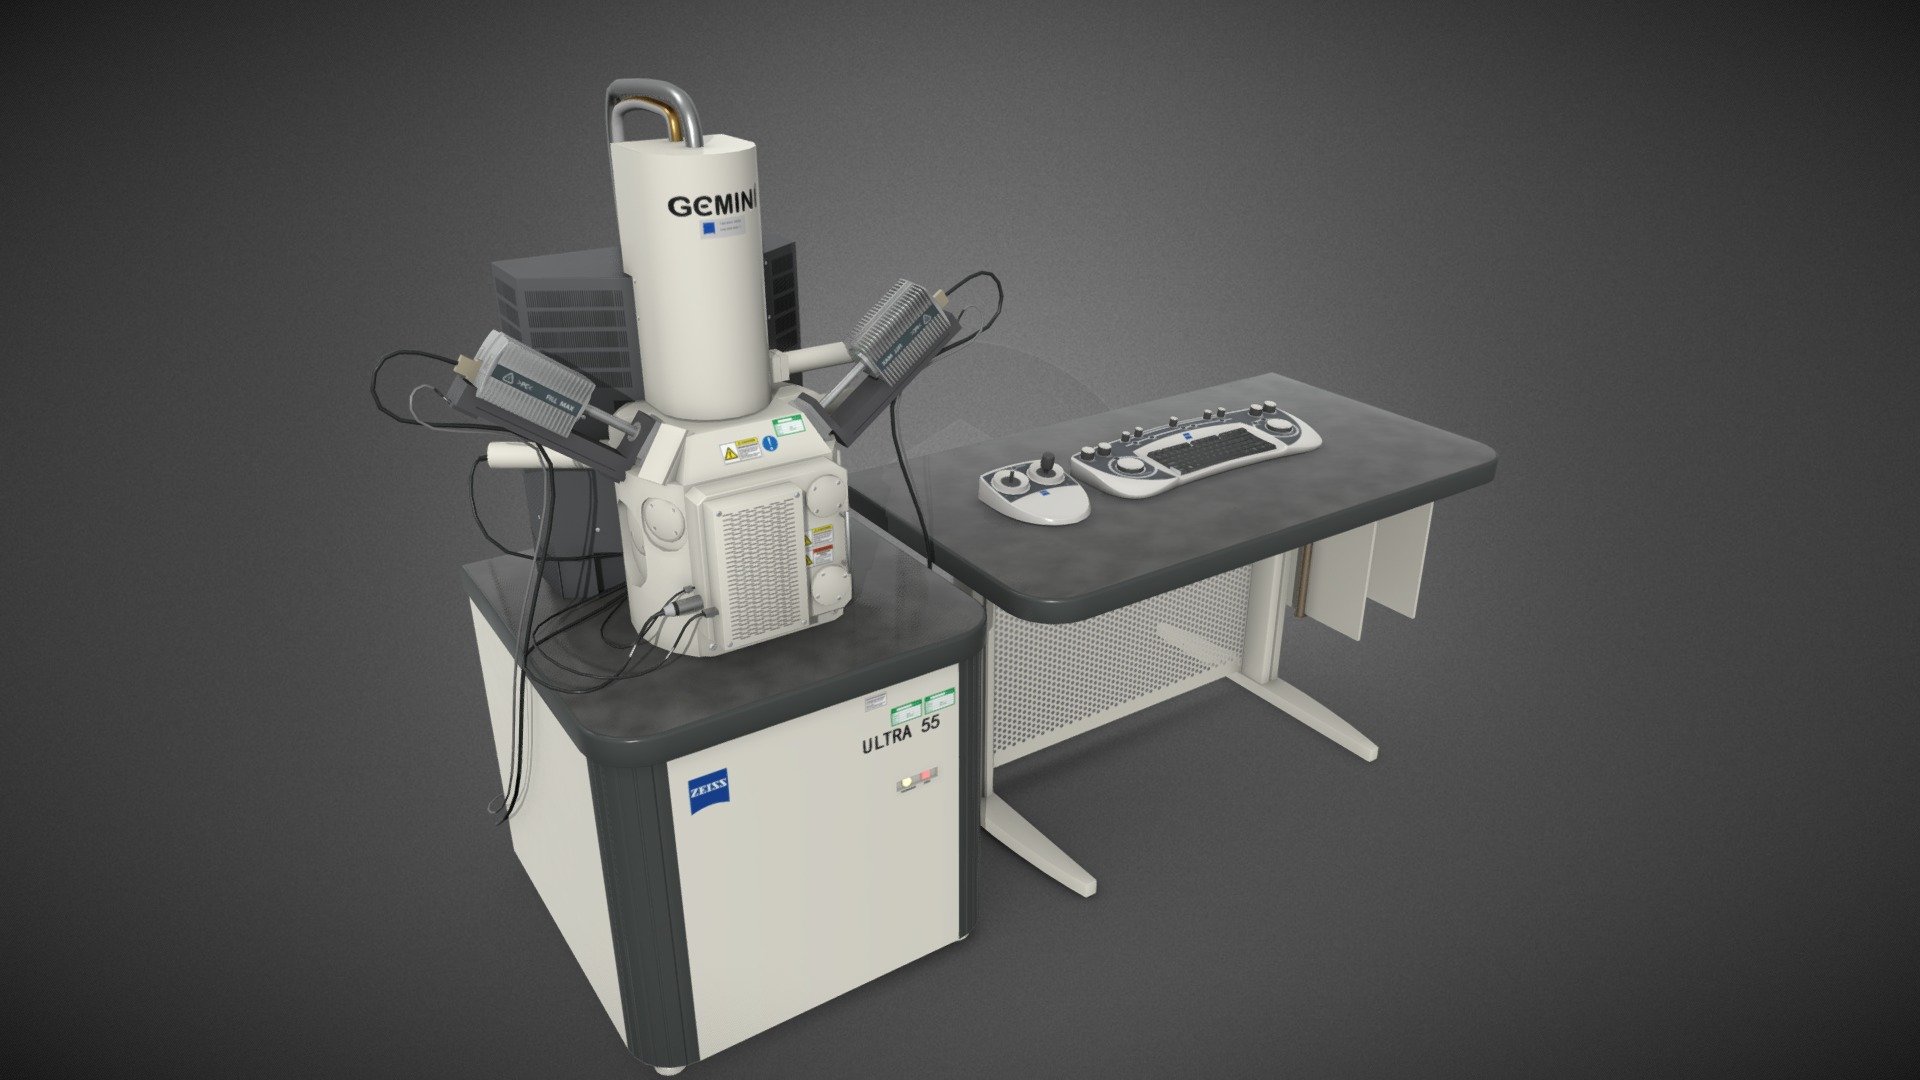 field emission scanning electron microscope  ZEISS Ultra 55 FESEM electron microscope
Modeled with Blender 3.3
Textures Created with Substance Painter 3d model